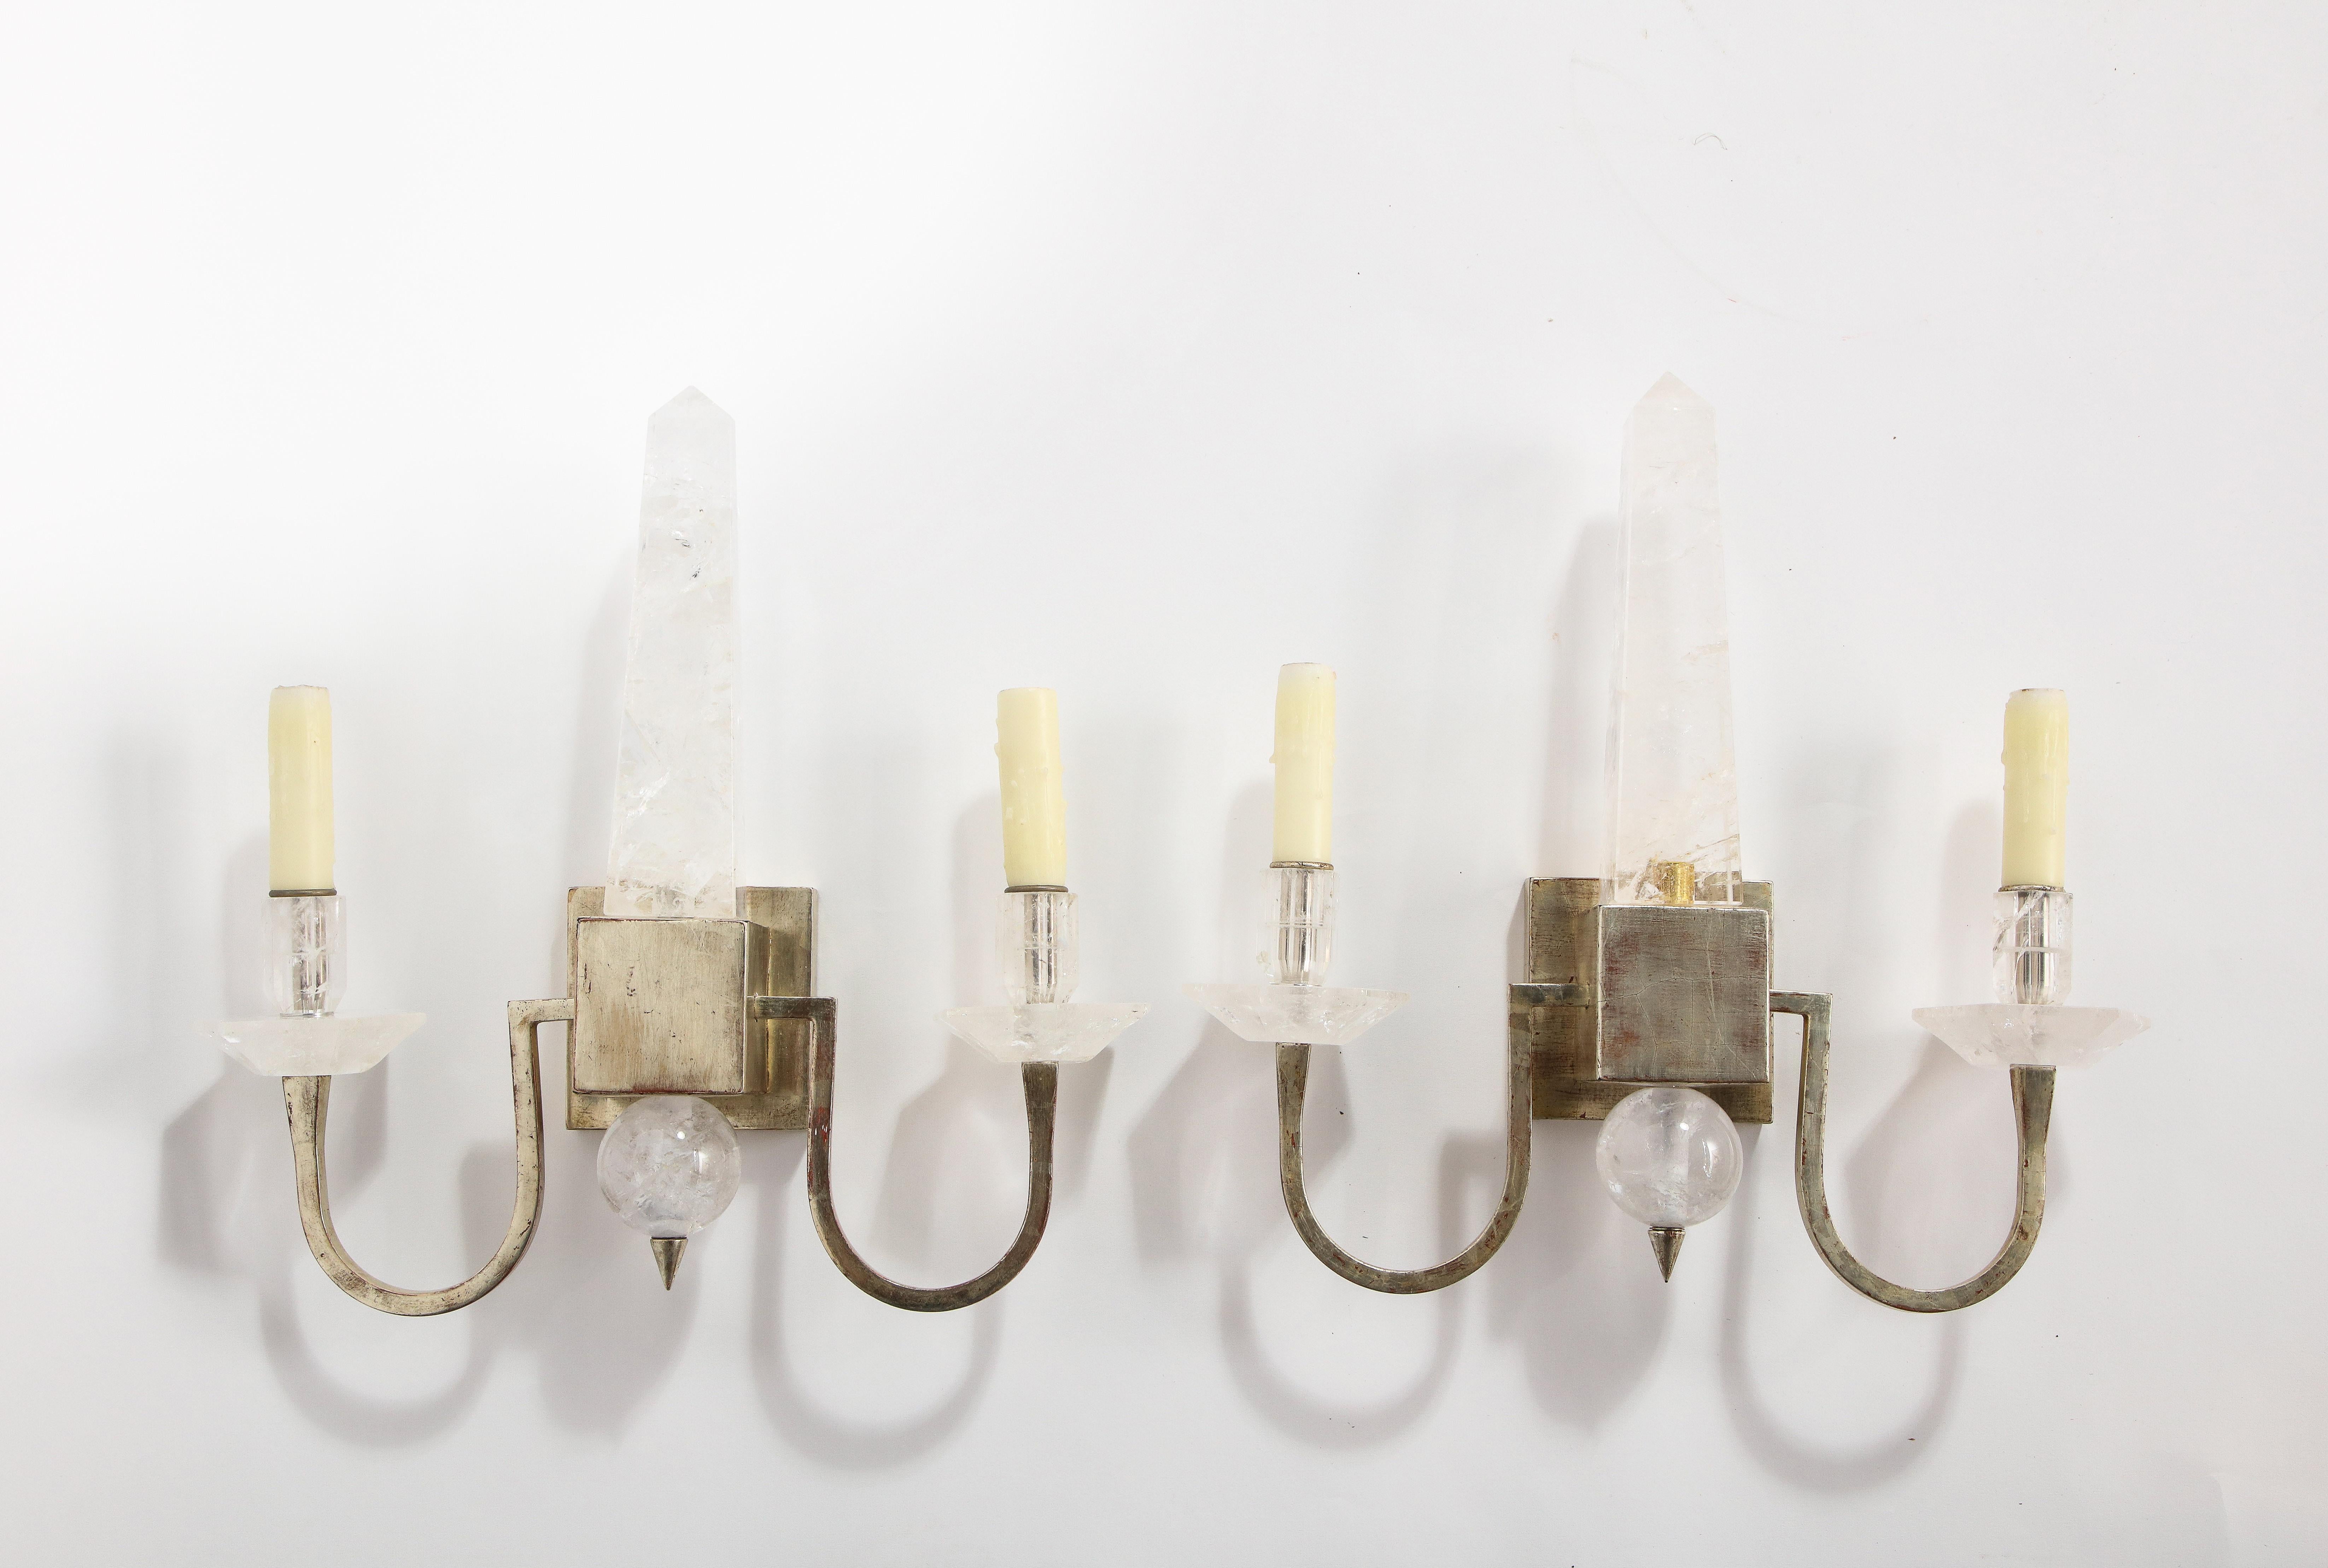 A fine set of four modern two-light rock crystal and silvered wall appliques/sconces with a hand carved center mounted rock crystal obelisk. This is a beautiful pair of modern era sconces. They have a beautiful form with two gorgeous silvered arms